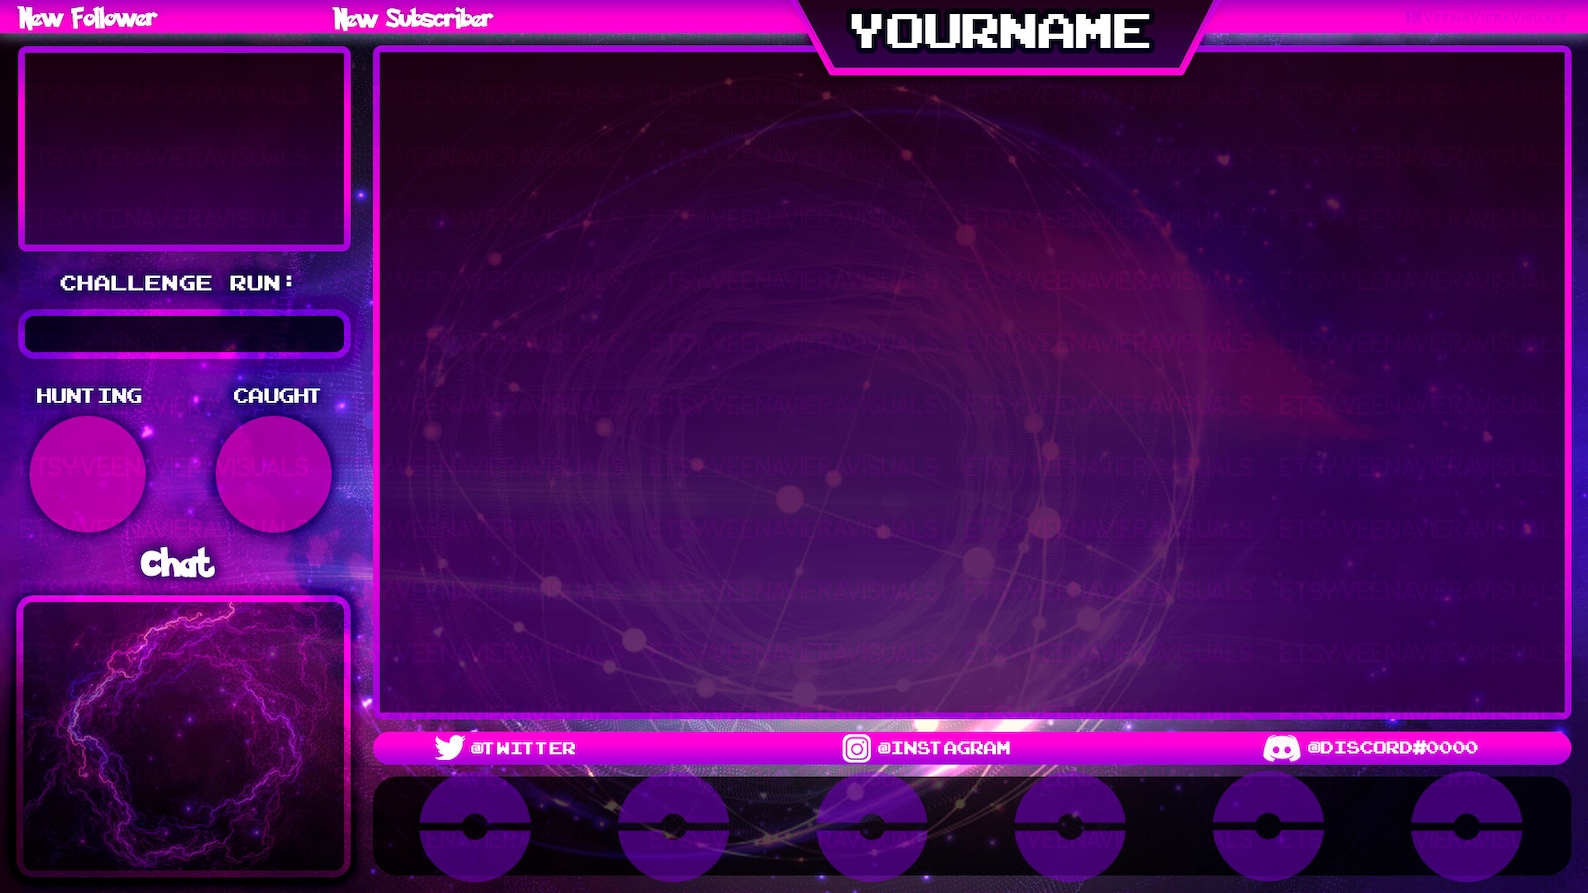 Ghost Pokemon Theme Stream Overlay Set Twitch Facebook and | Etsy